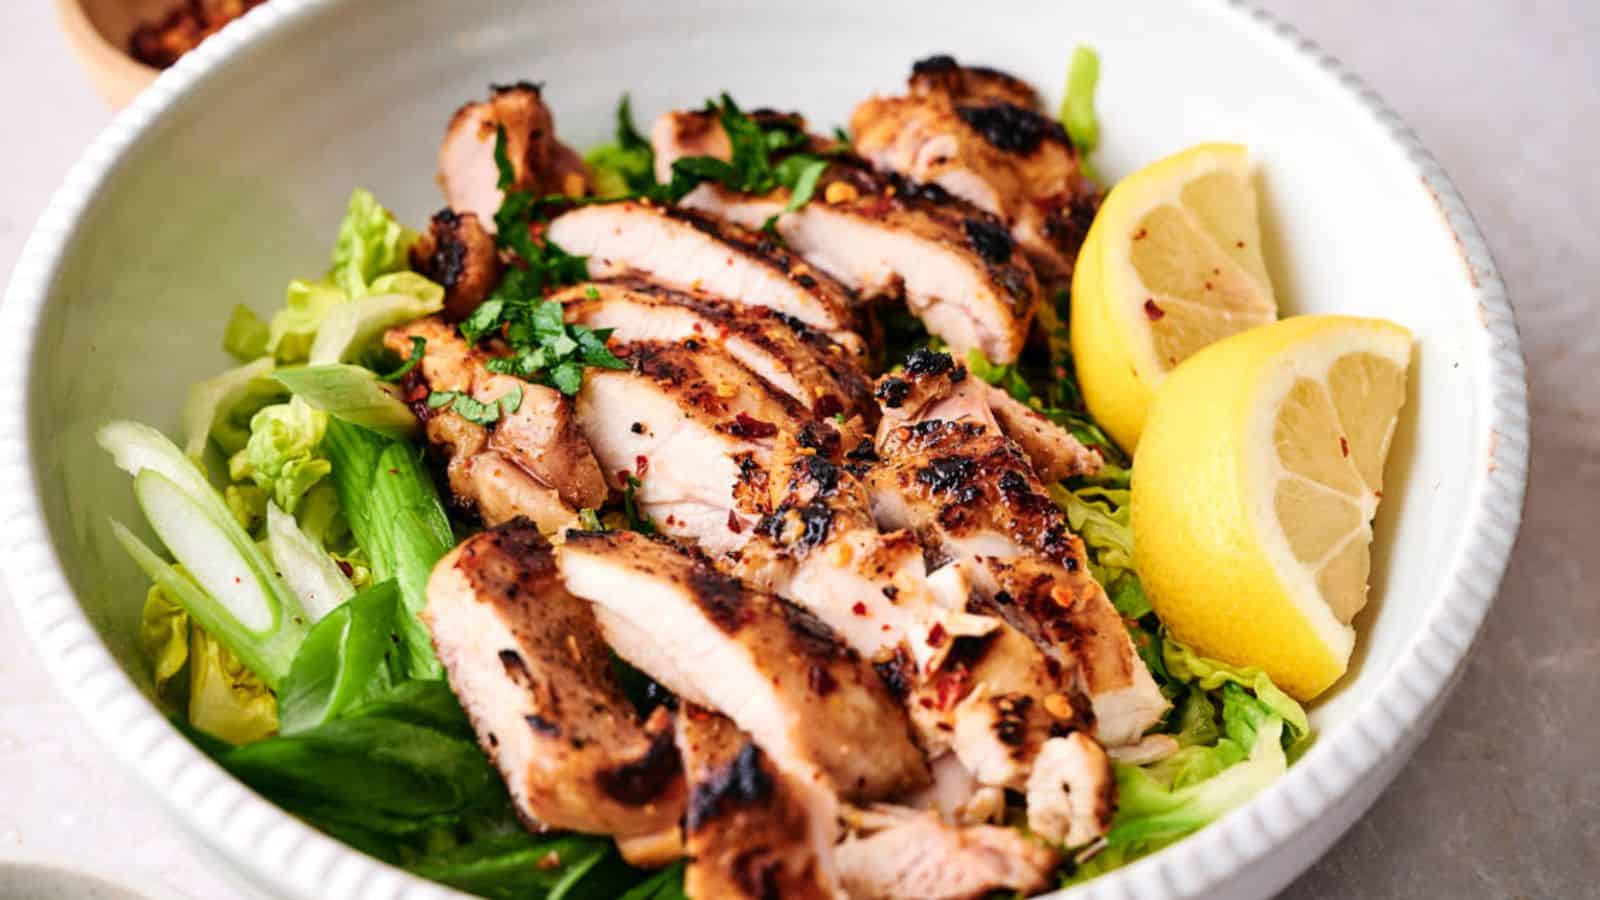 Grilled chicken breast slices served over a bed of greens with lemon wedges on the side.